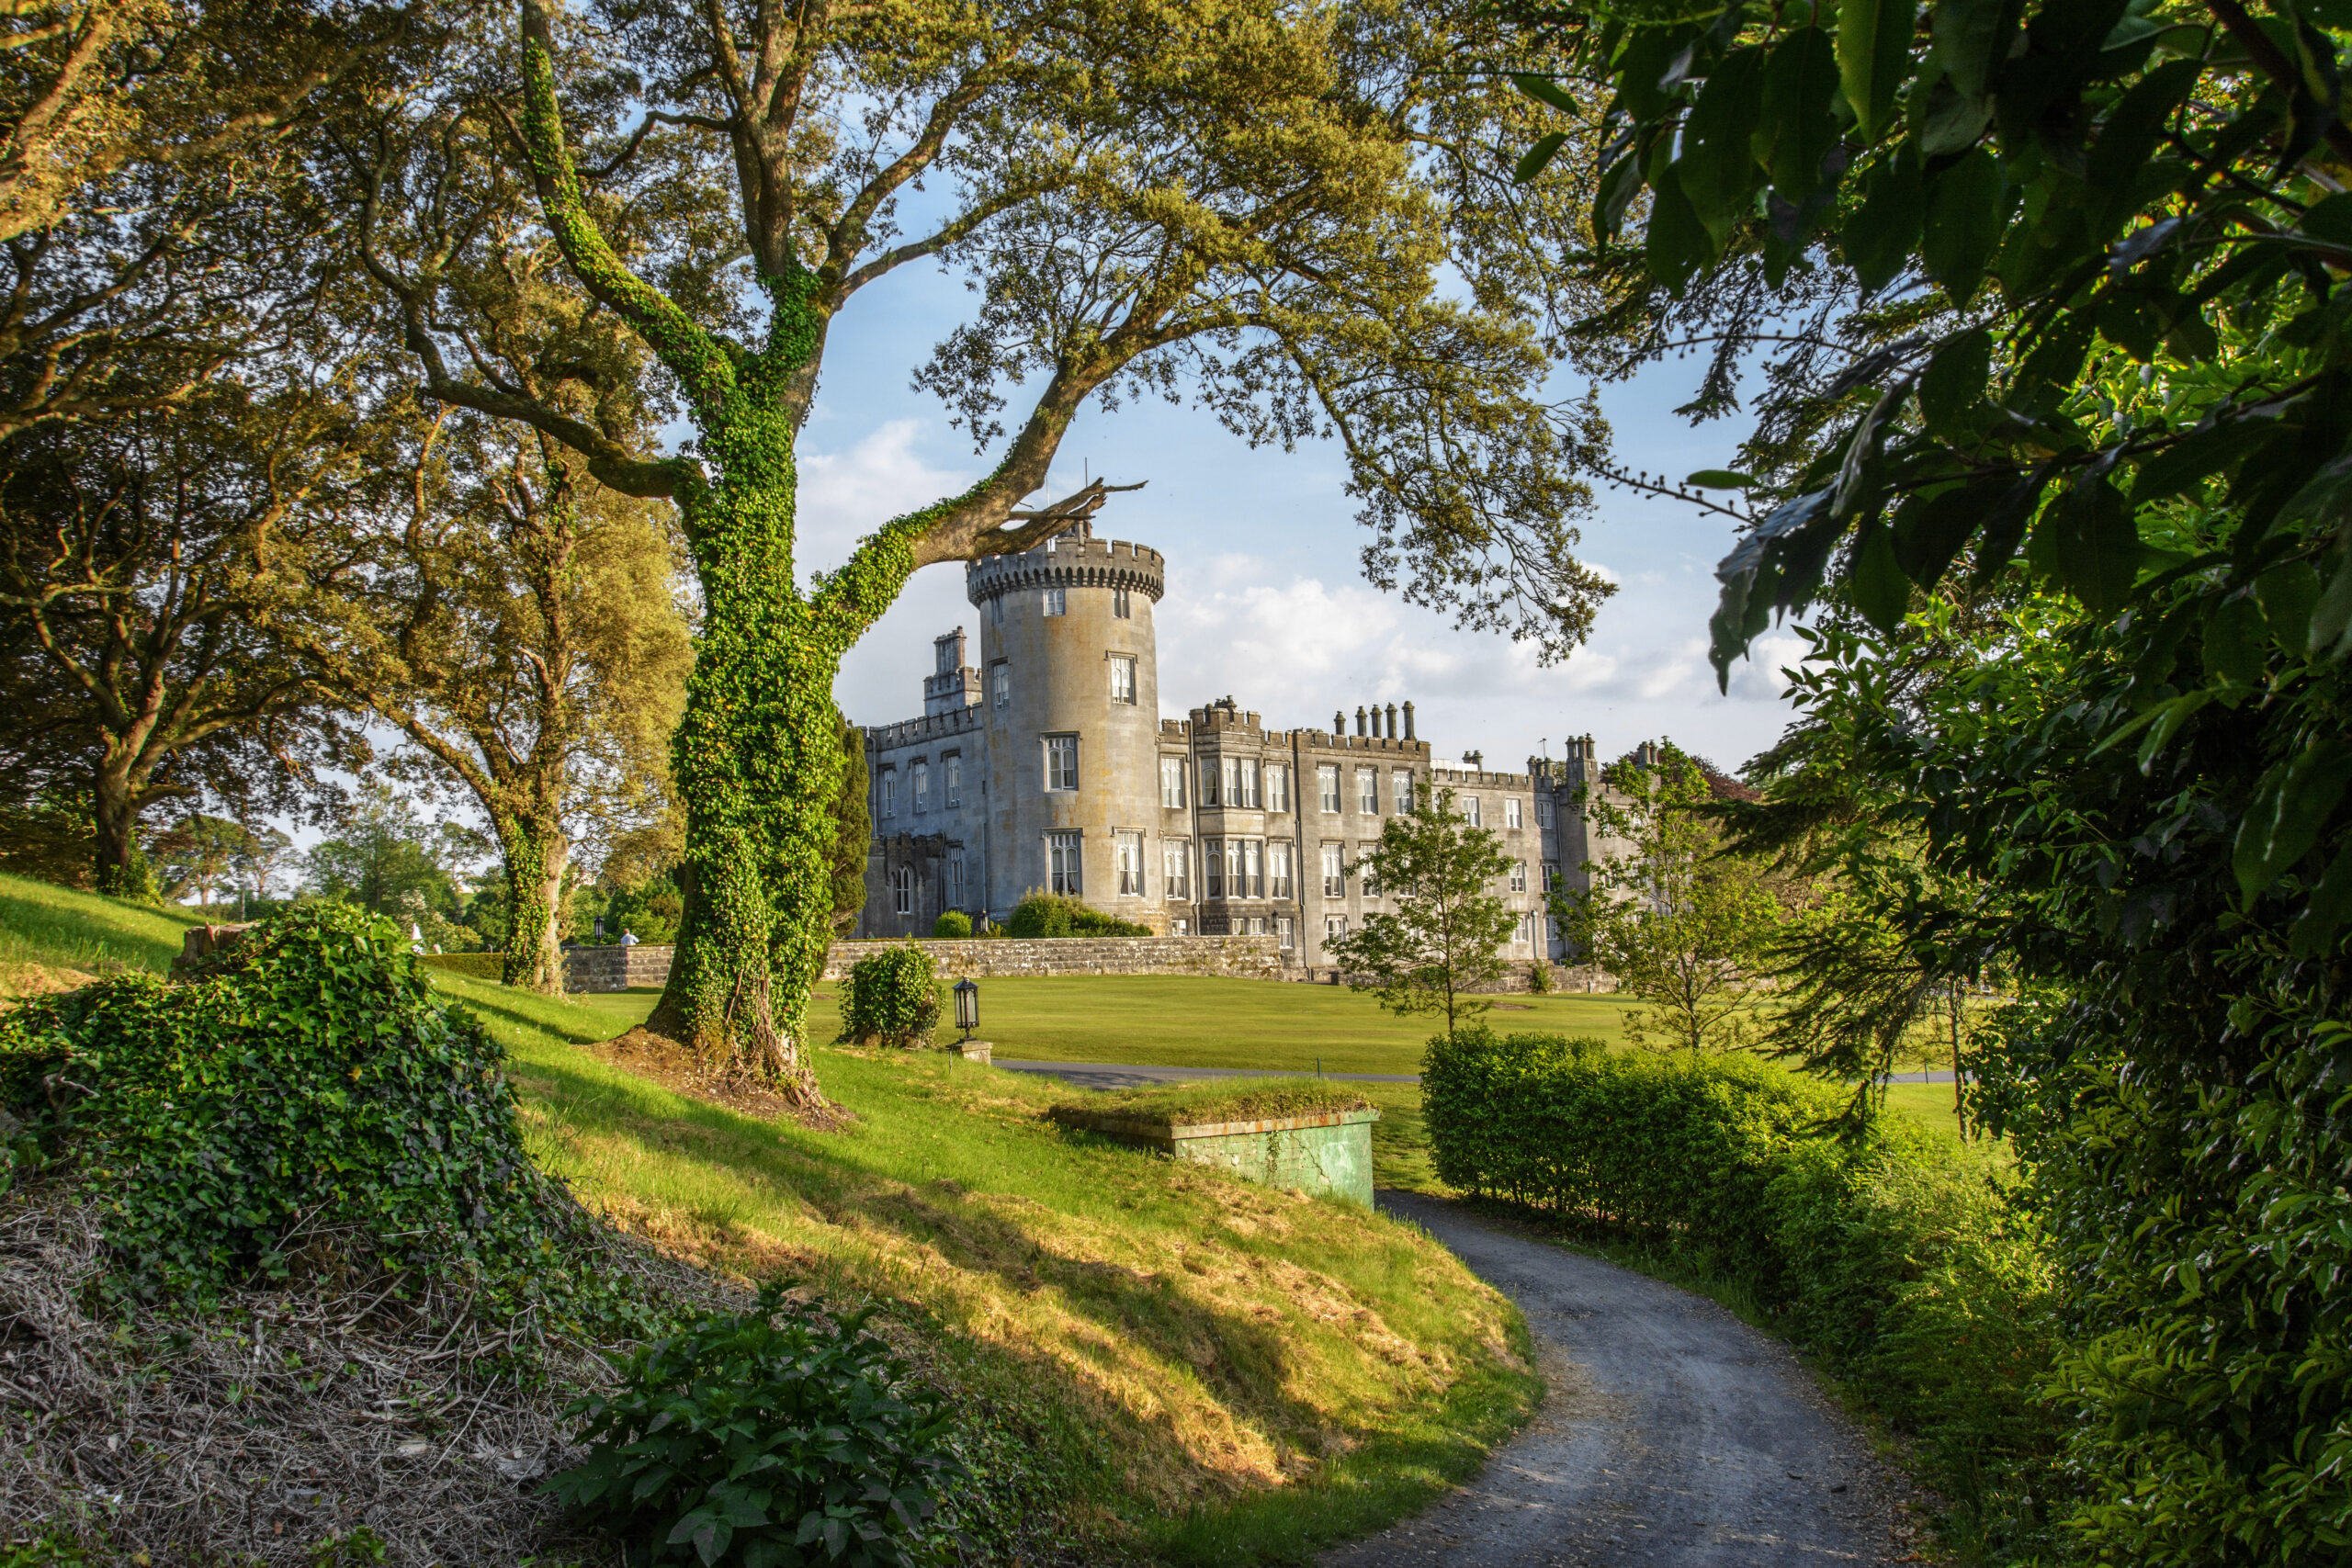 View up the drive surrounded by old growth trees to a beautiful Irish castle with a large turret and many chimneys. 